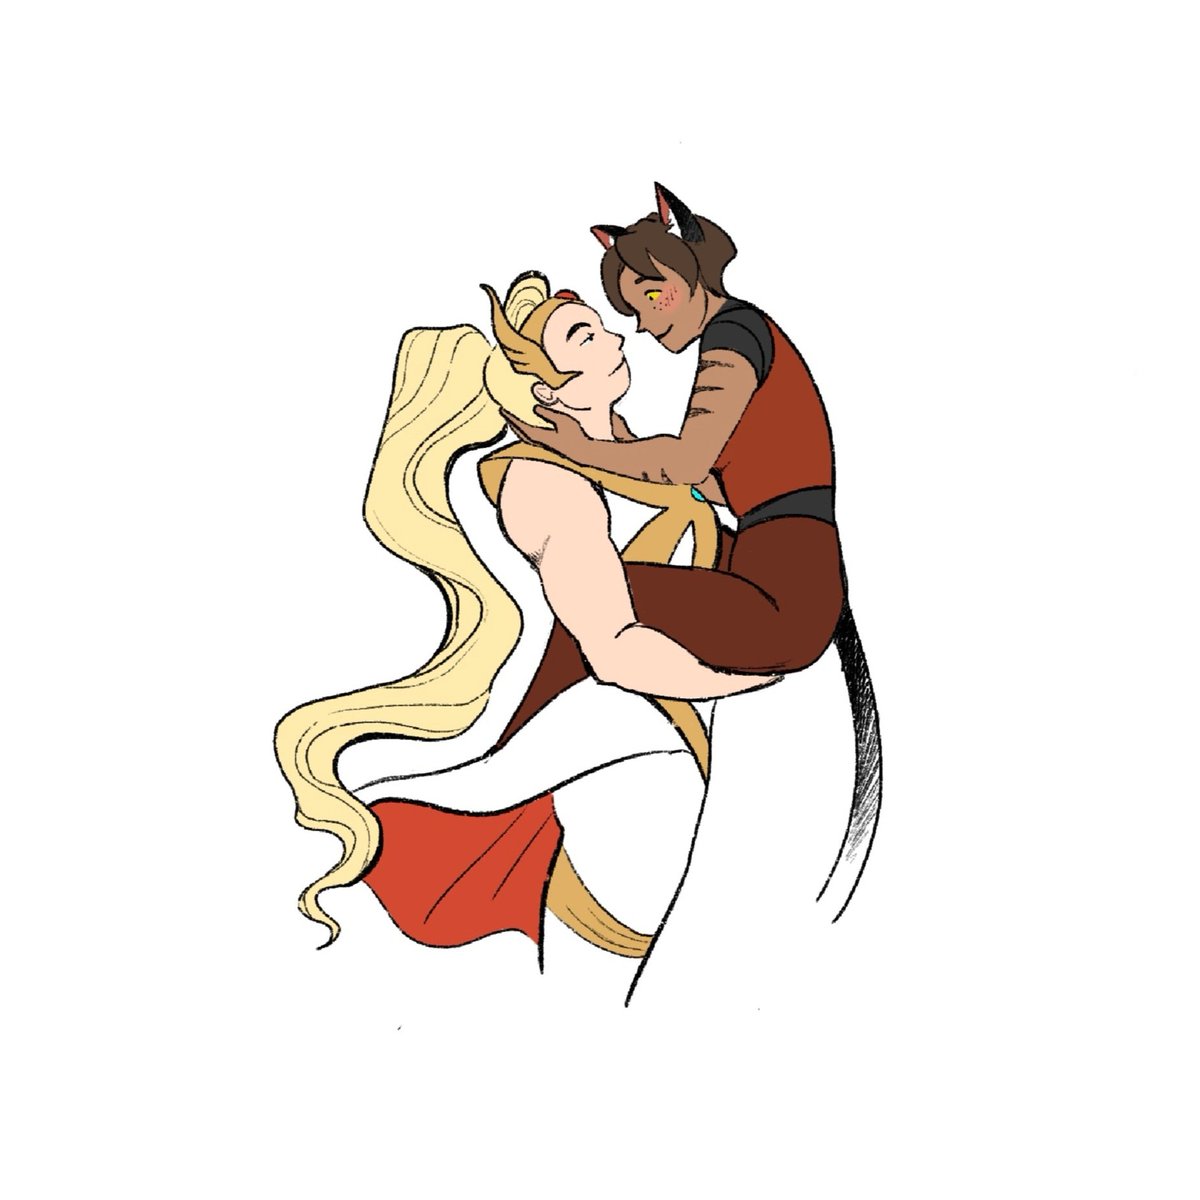 Thank you for all the love on my artwork 💜 here is a quick catradora sketch for all of you

#catradora #shera #spop